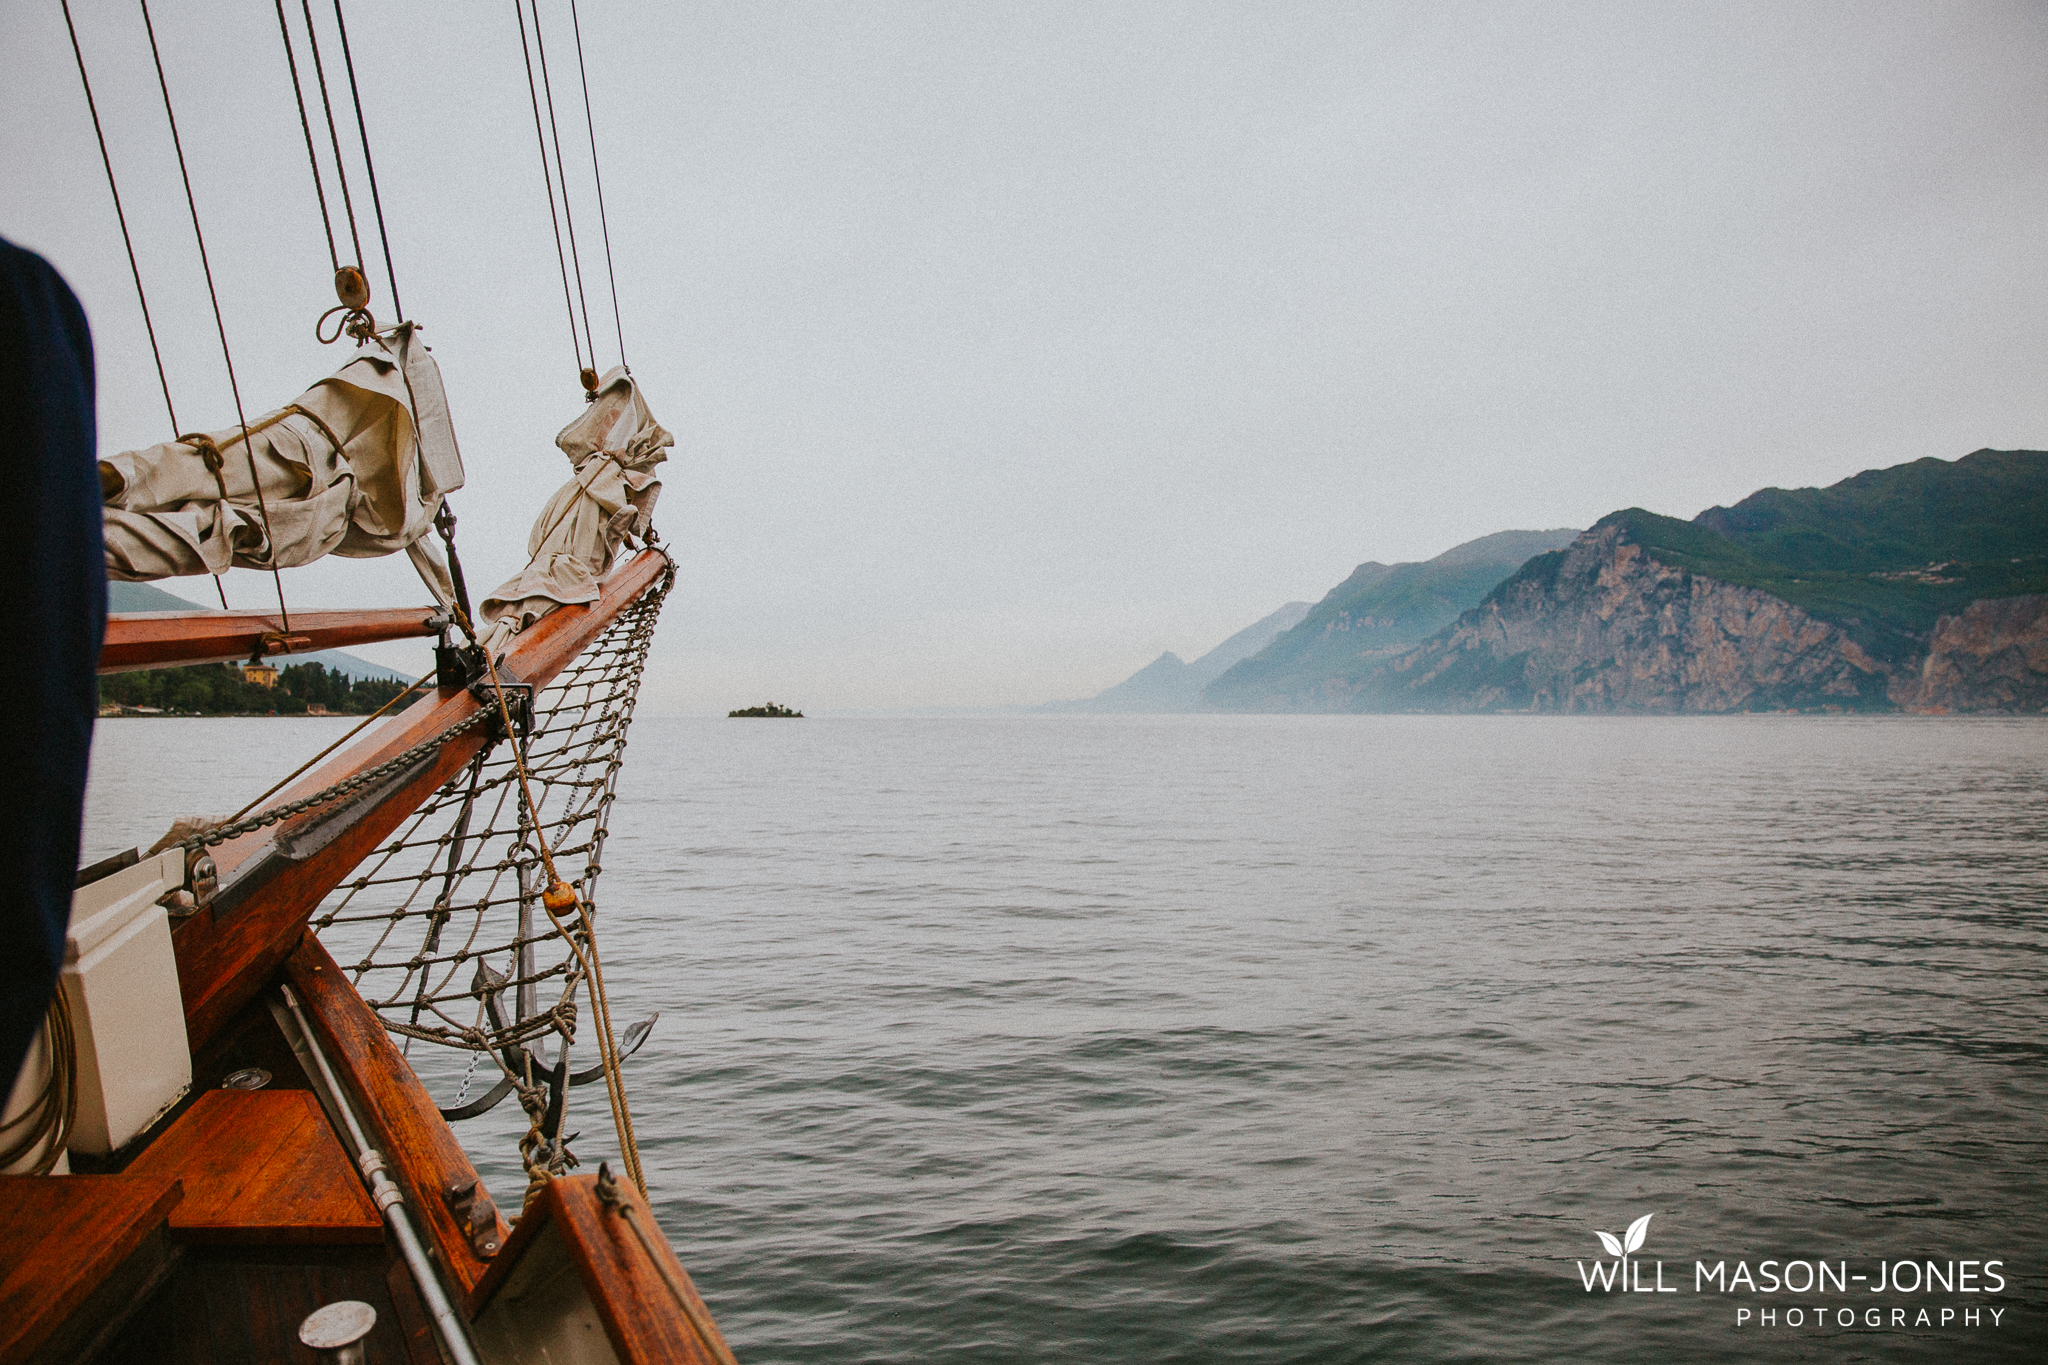  sail boat trip on lake garda after malcesine castle wedding photography 